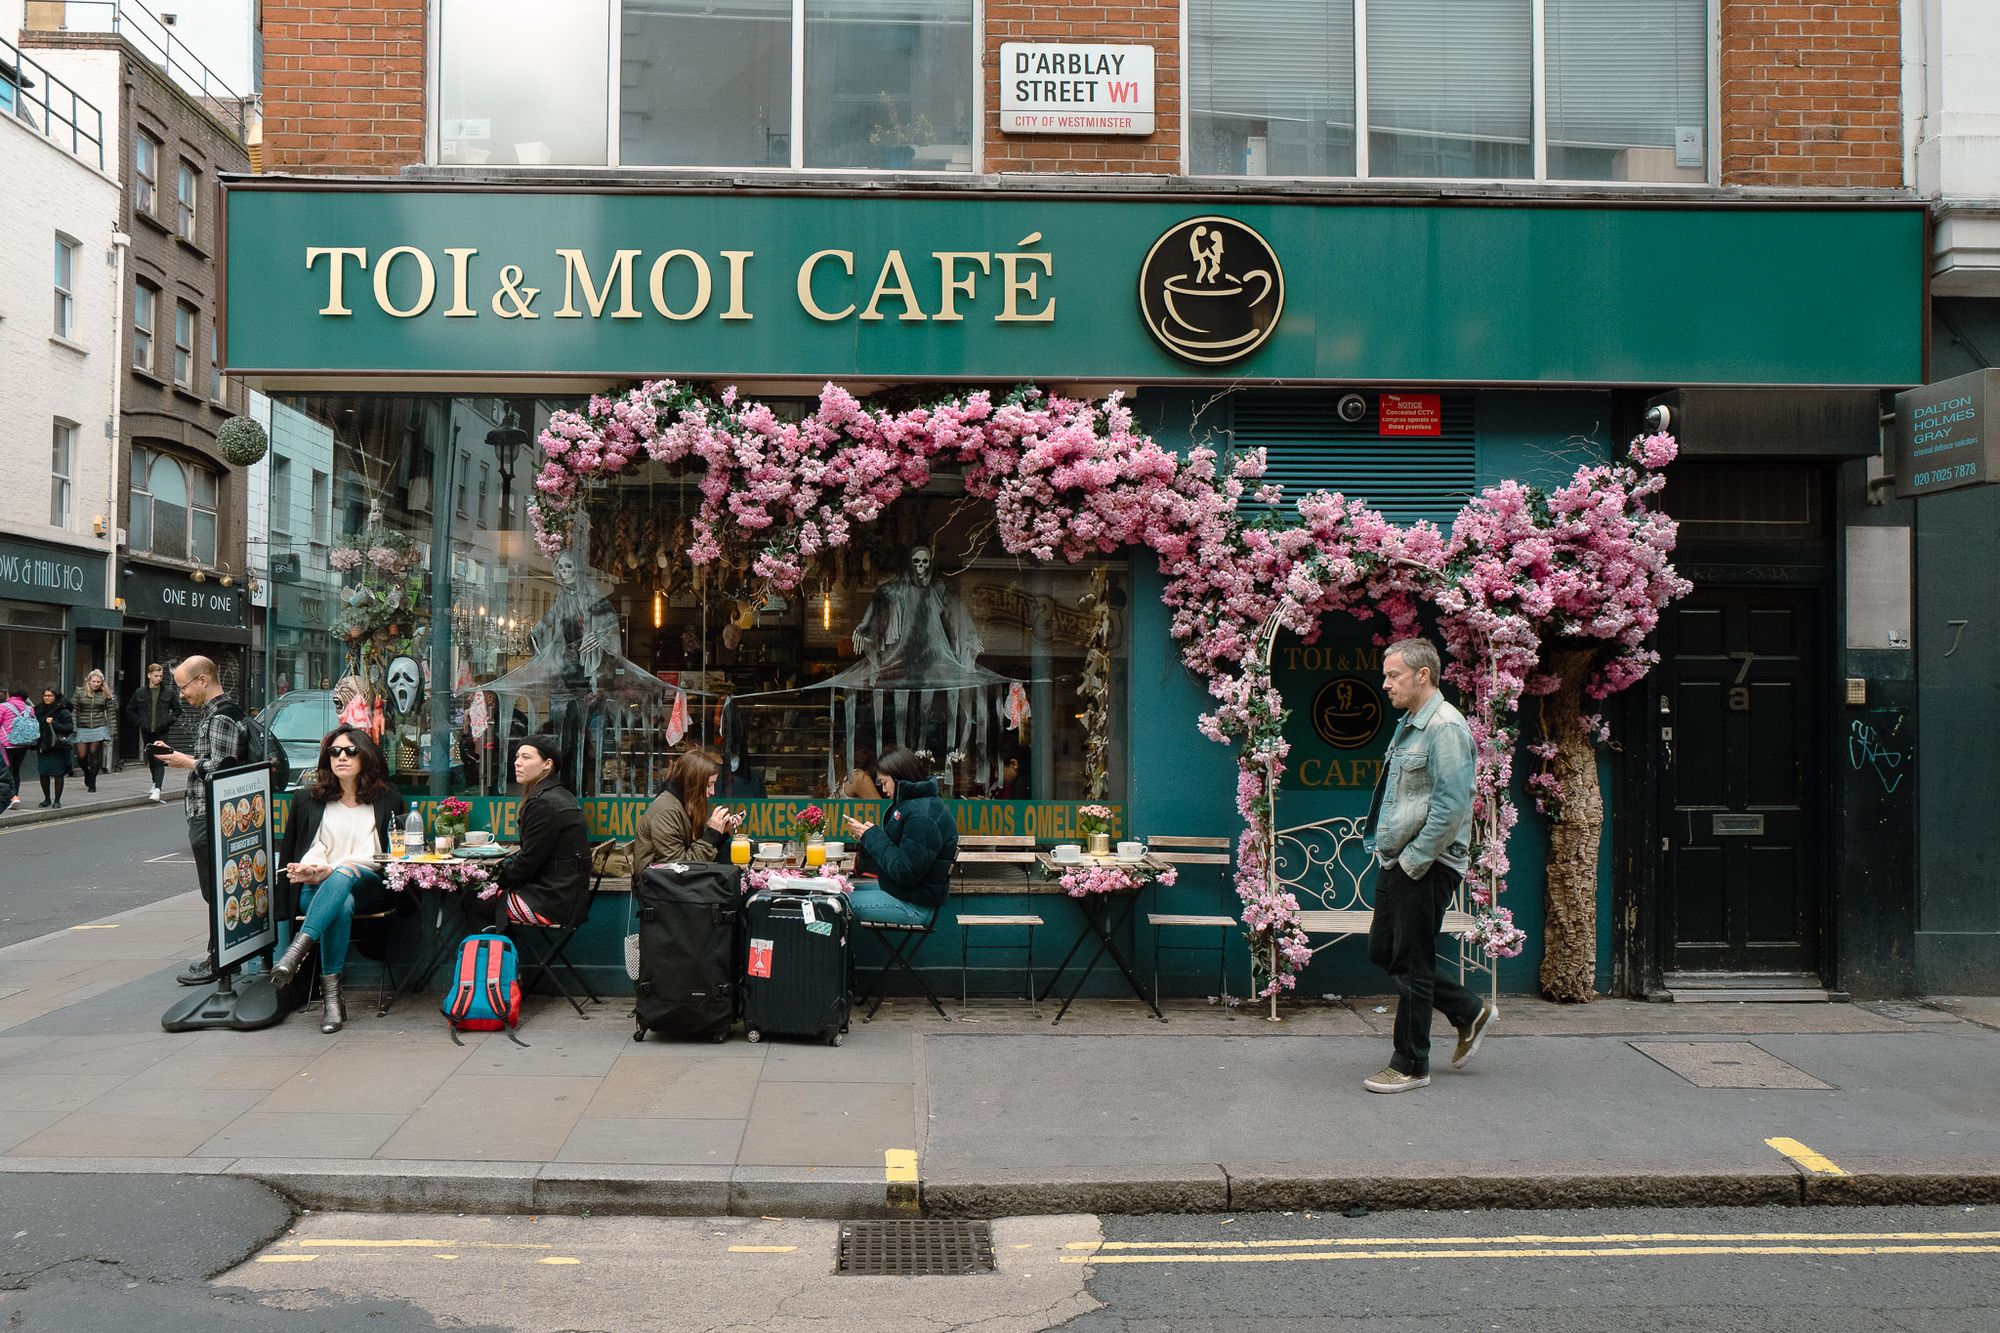 Toi & Moi Cafe in London. There are people sat outside. The cafe is painted green and there are pink flowers flowing around it. 